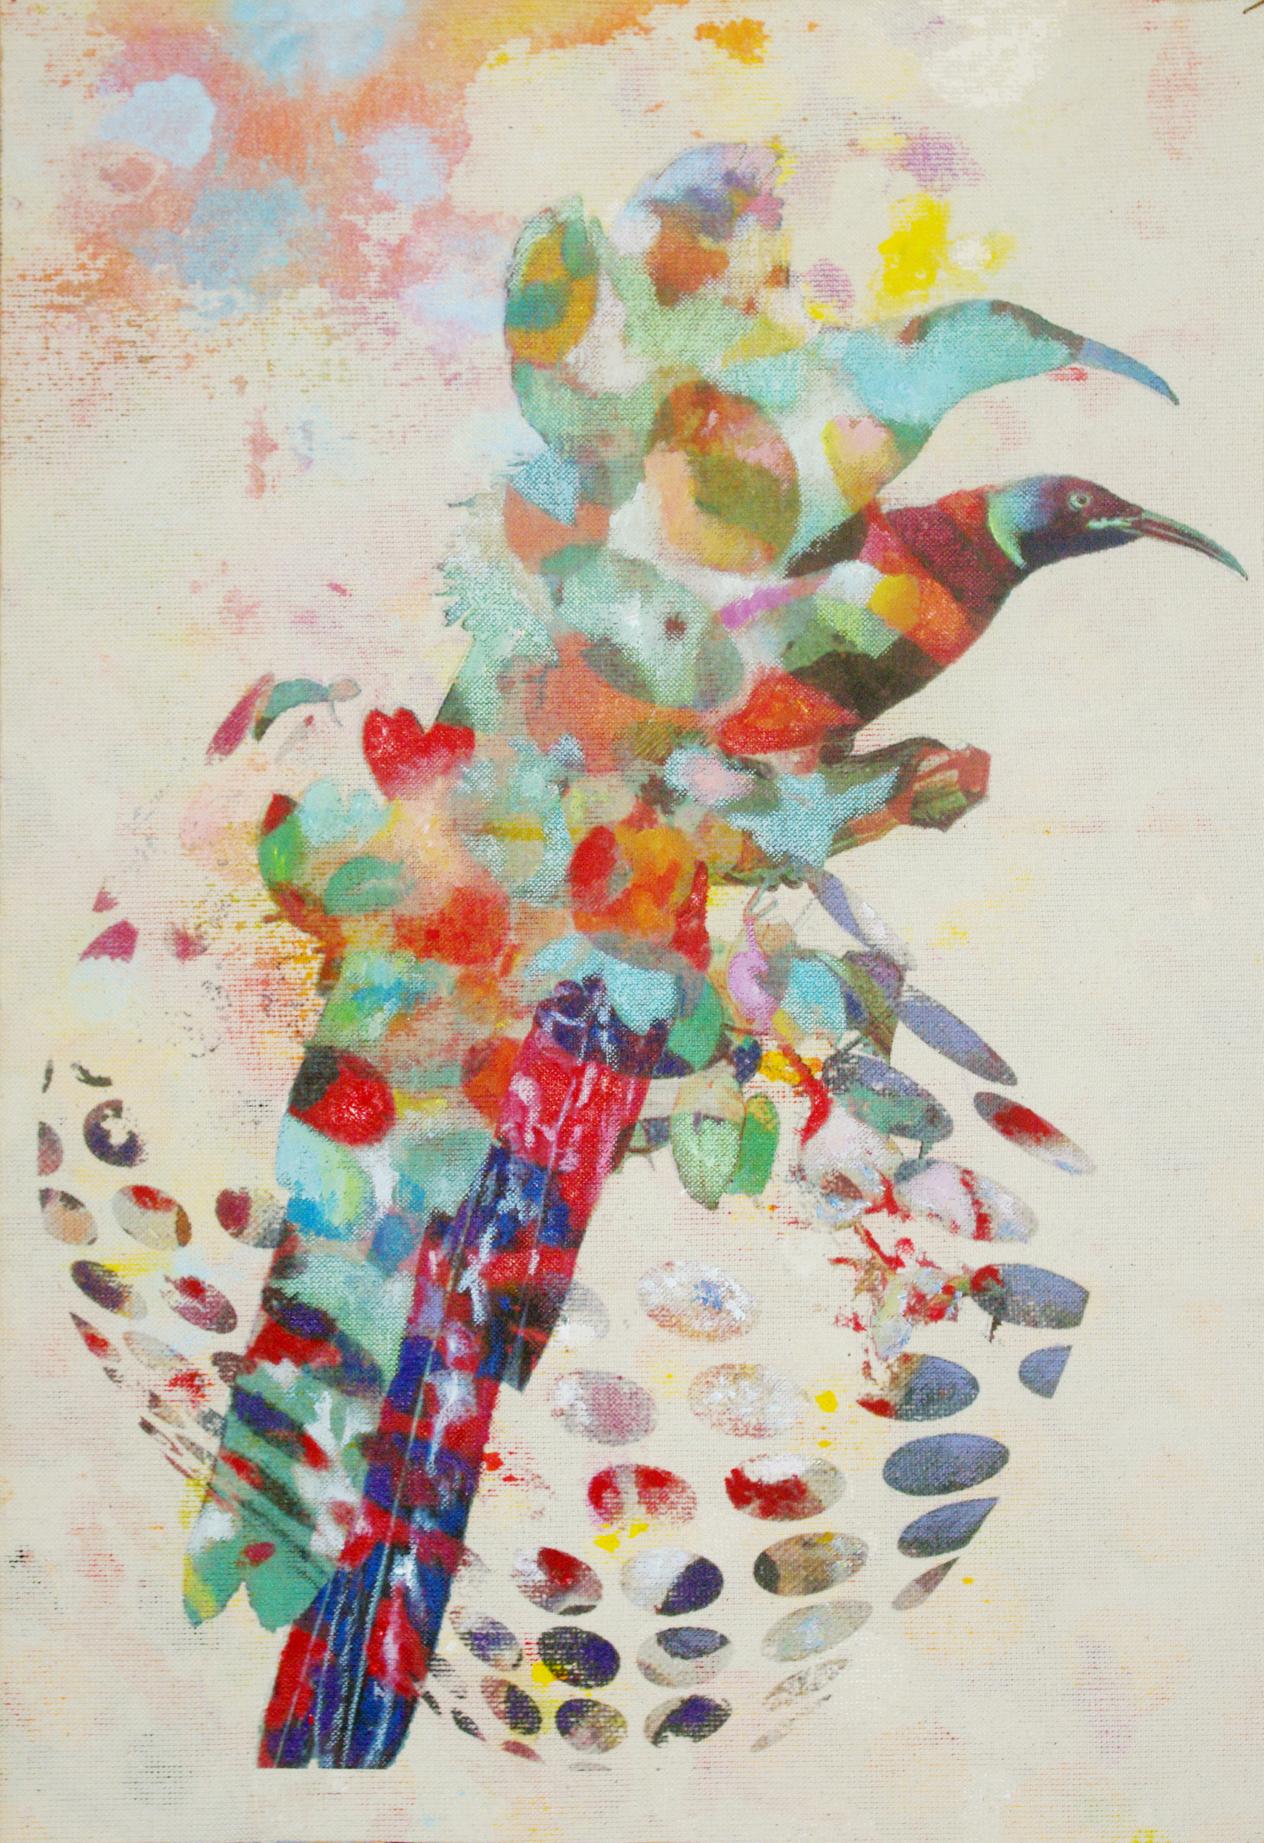 Francisco Nicolás Abstract Painting - Birds 007- Contemporary, Abstract, Expressionist, Modern, Street art, Surrealist